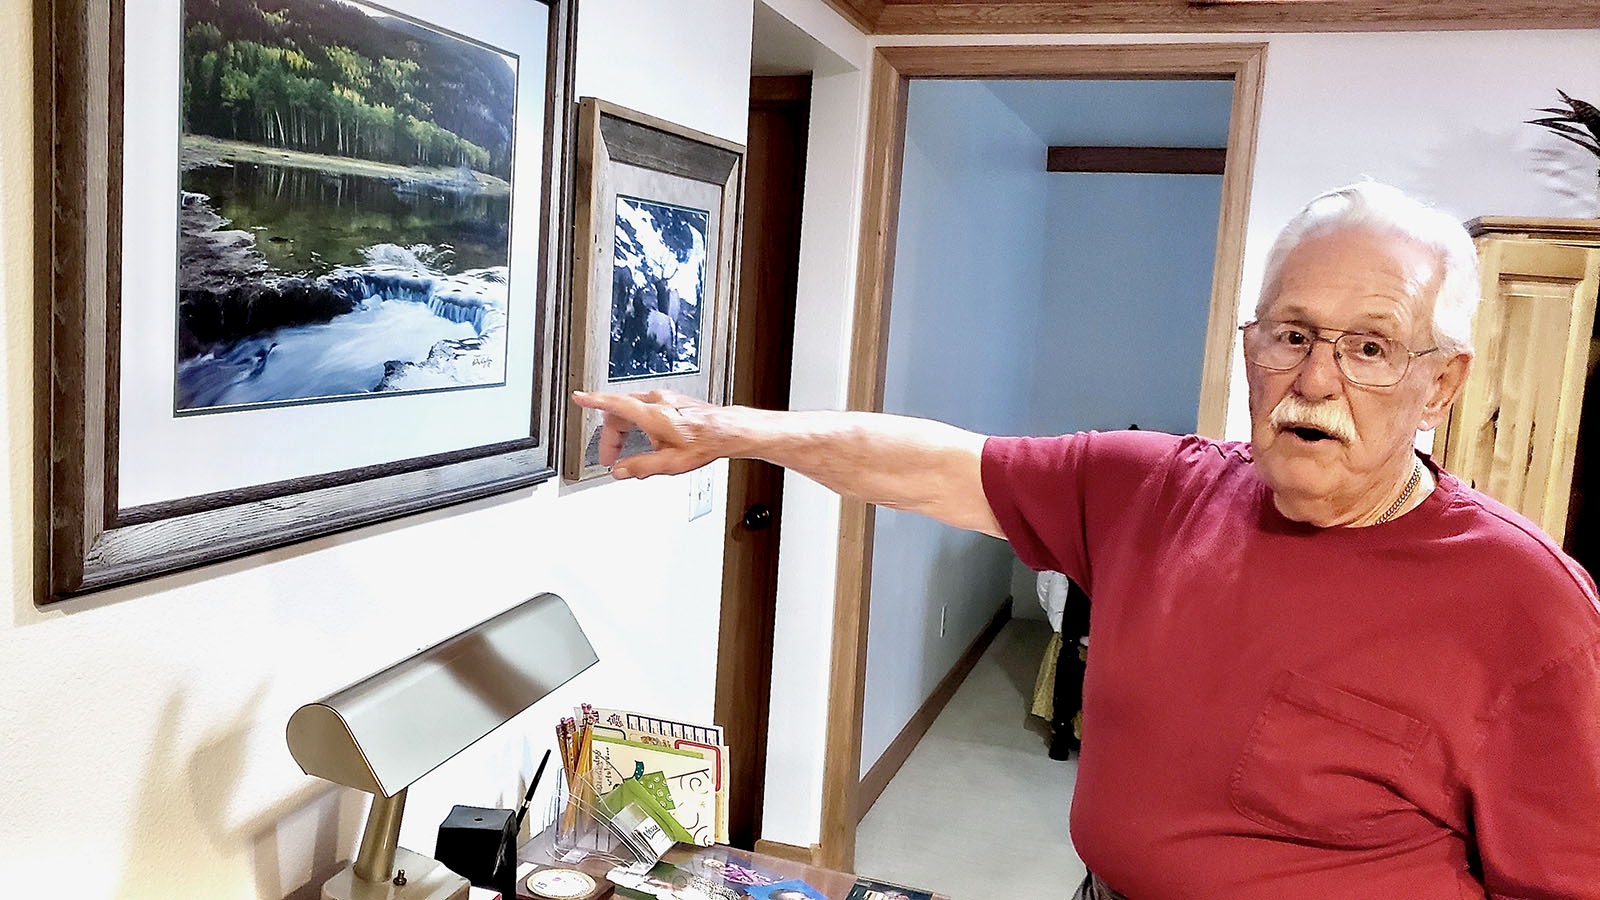 Howard Dykes points to a photo of the dam in Estes Park, Colorado, that failed in 1982. It was never rebuilt, so it's a photo that can never be duplicated.